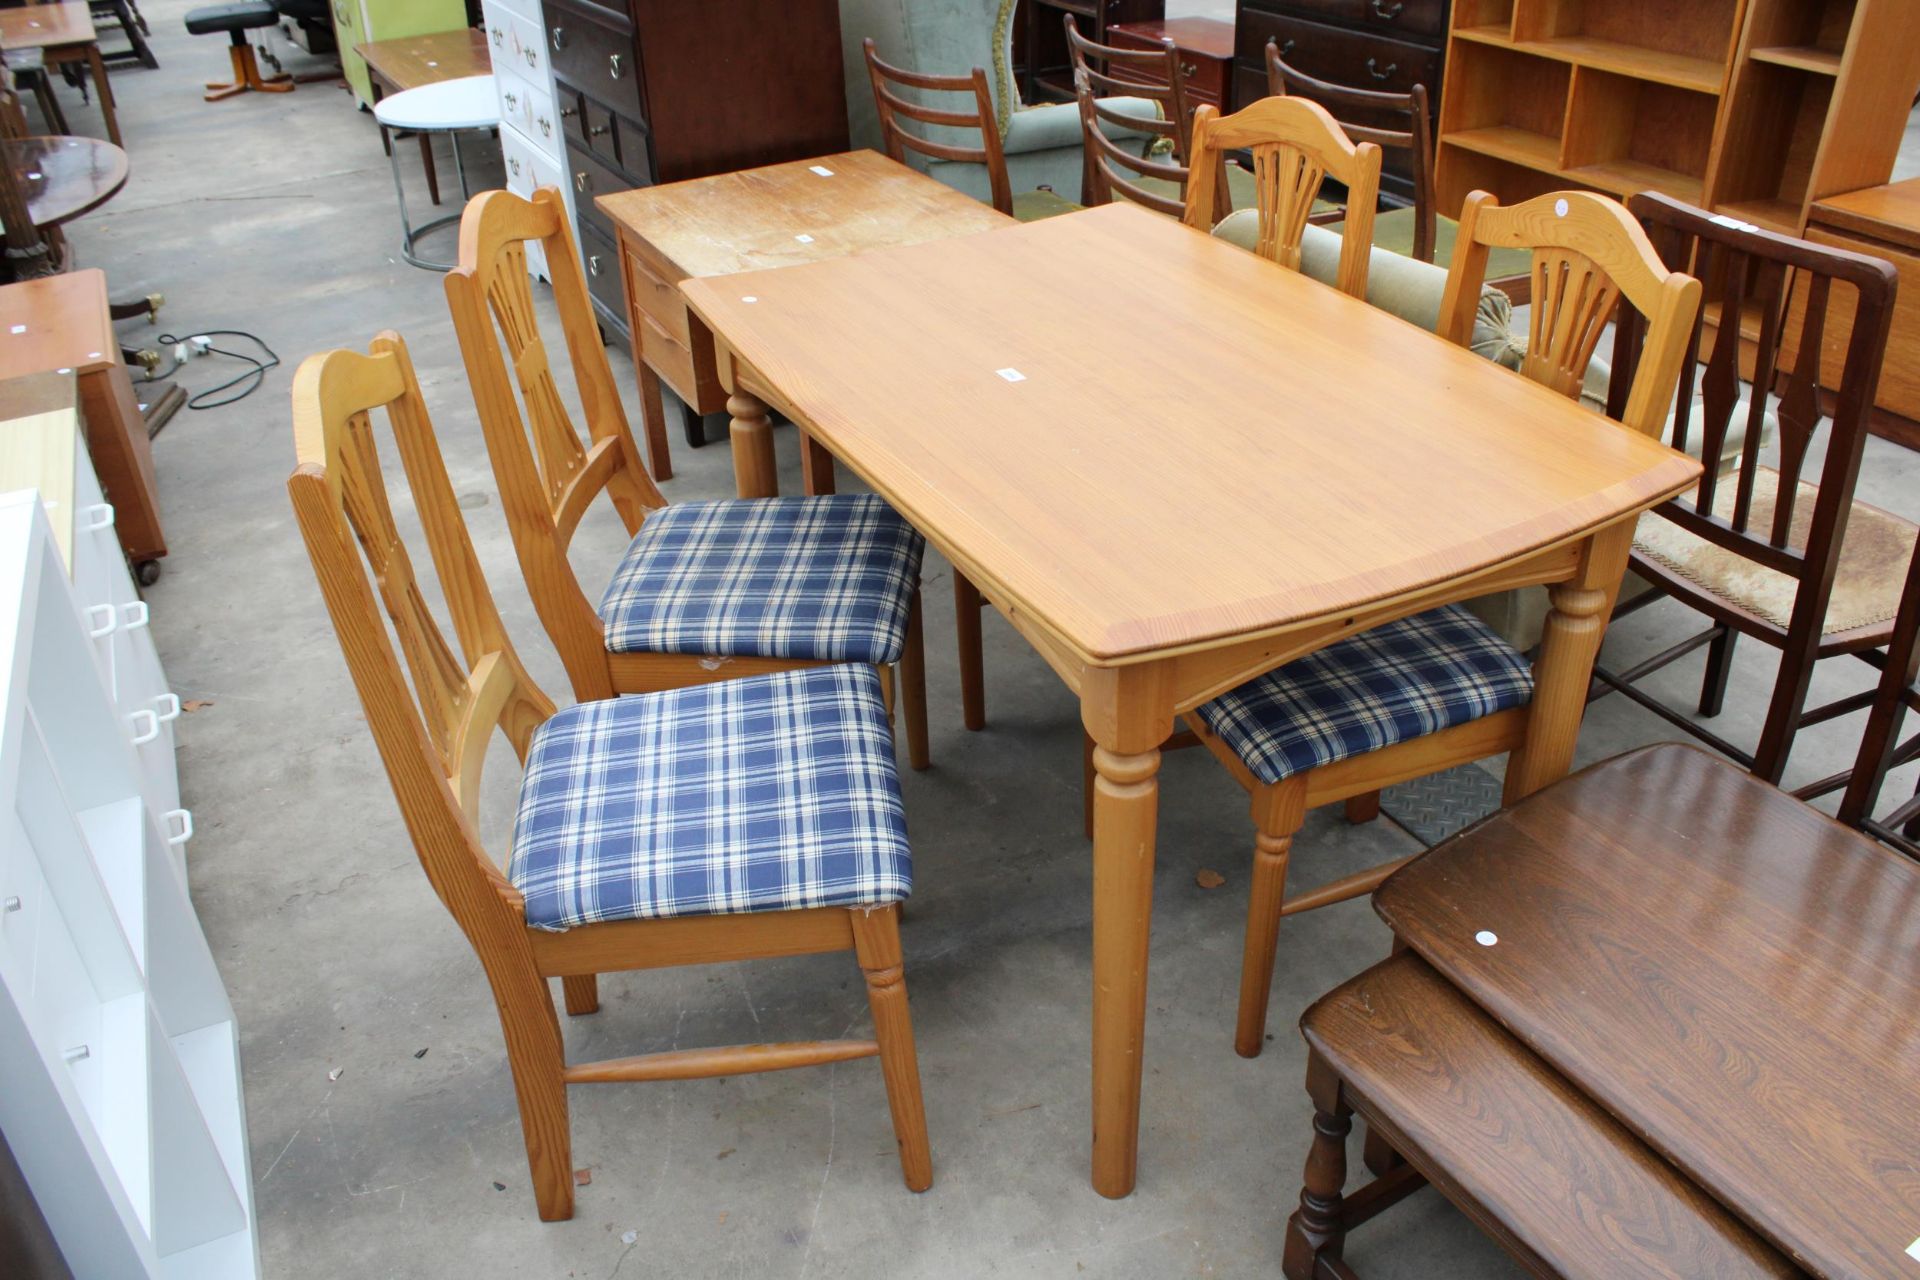 A PINE DINING TABLE 45" X 29" AND FOUR CHAIRS - Image 2 of 4